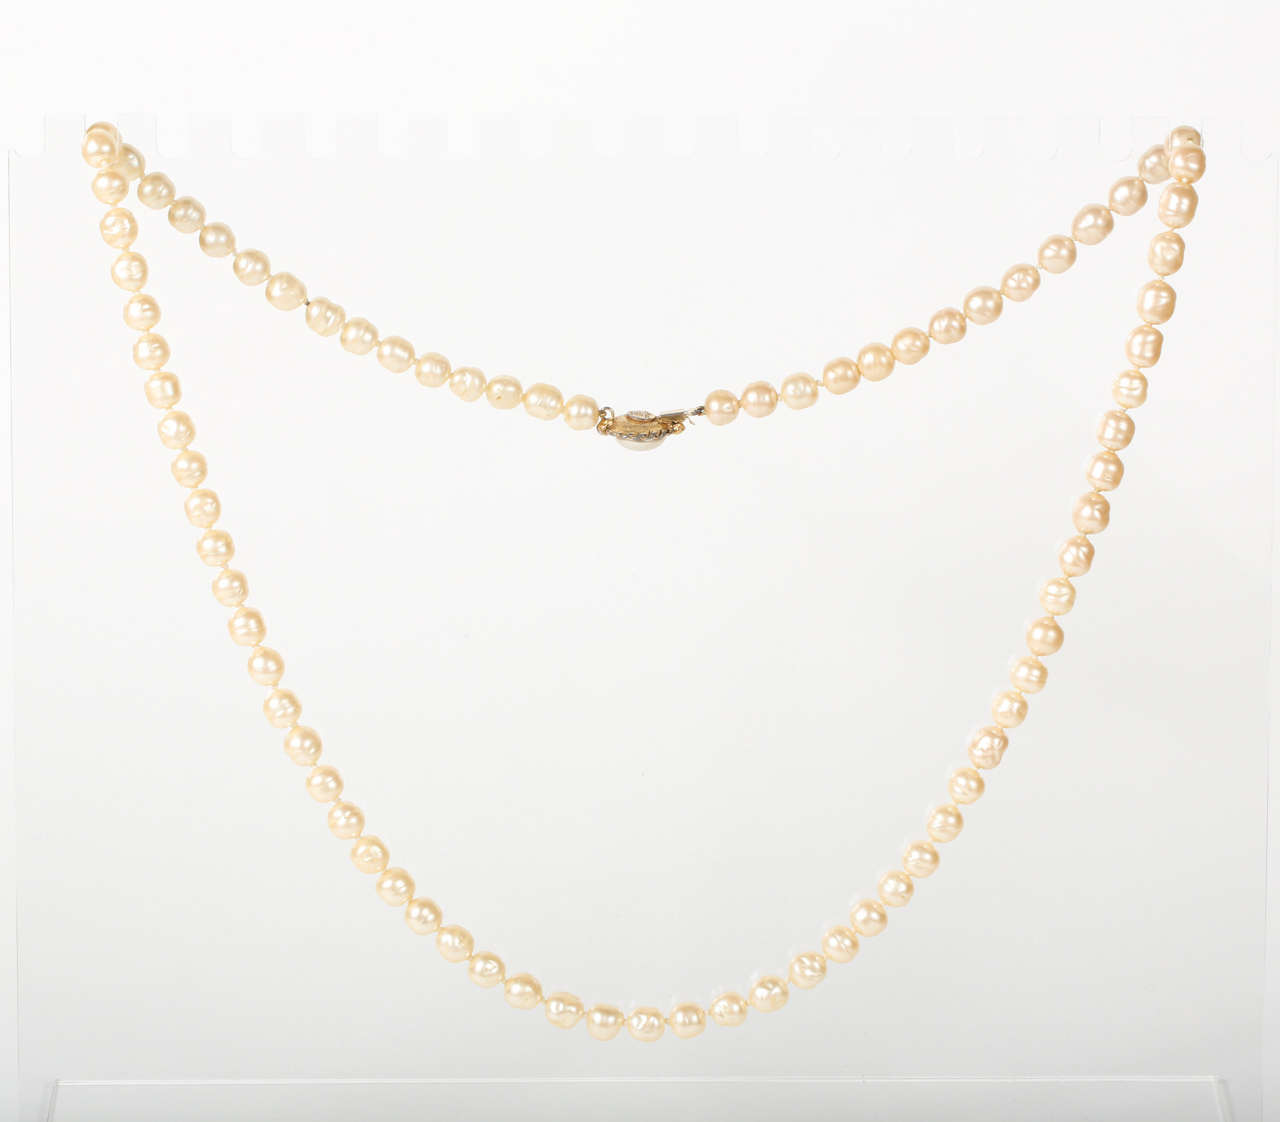 A beautiful glass pearl necklace with a large pearl button clasp surrounded by a gilt metal rope frame. This necklace is long enough that it could be doubled up. The back of the clasp features the 